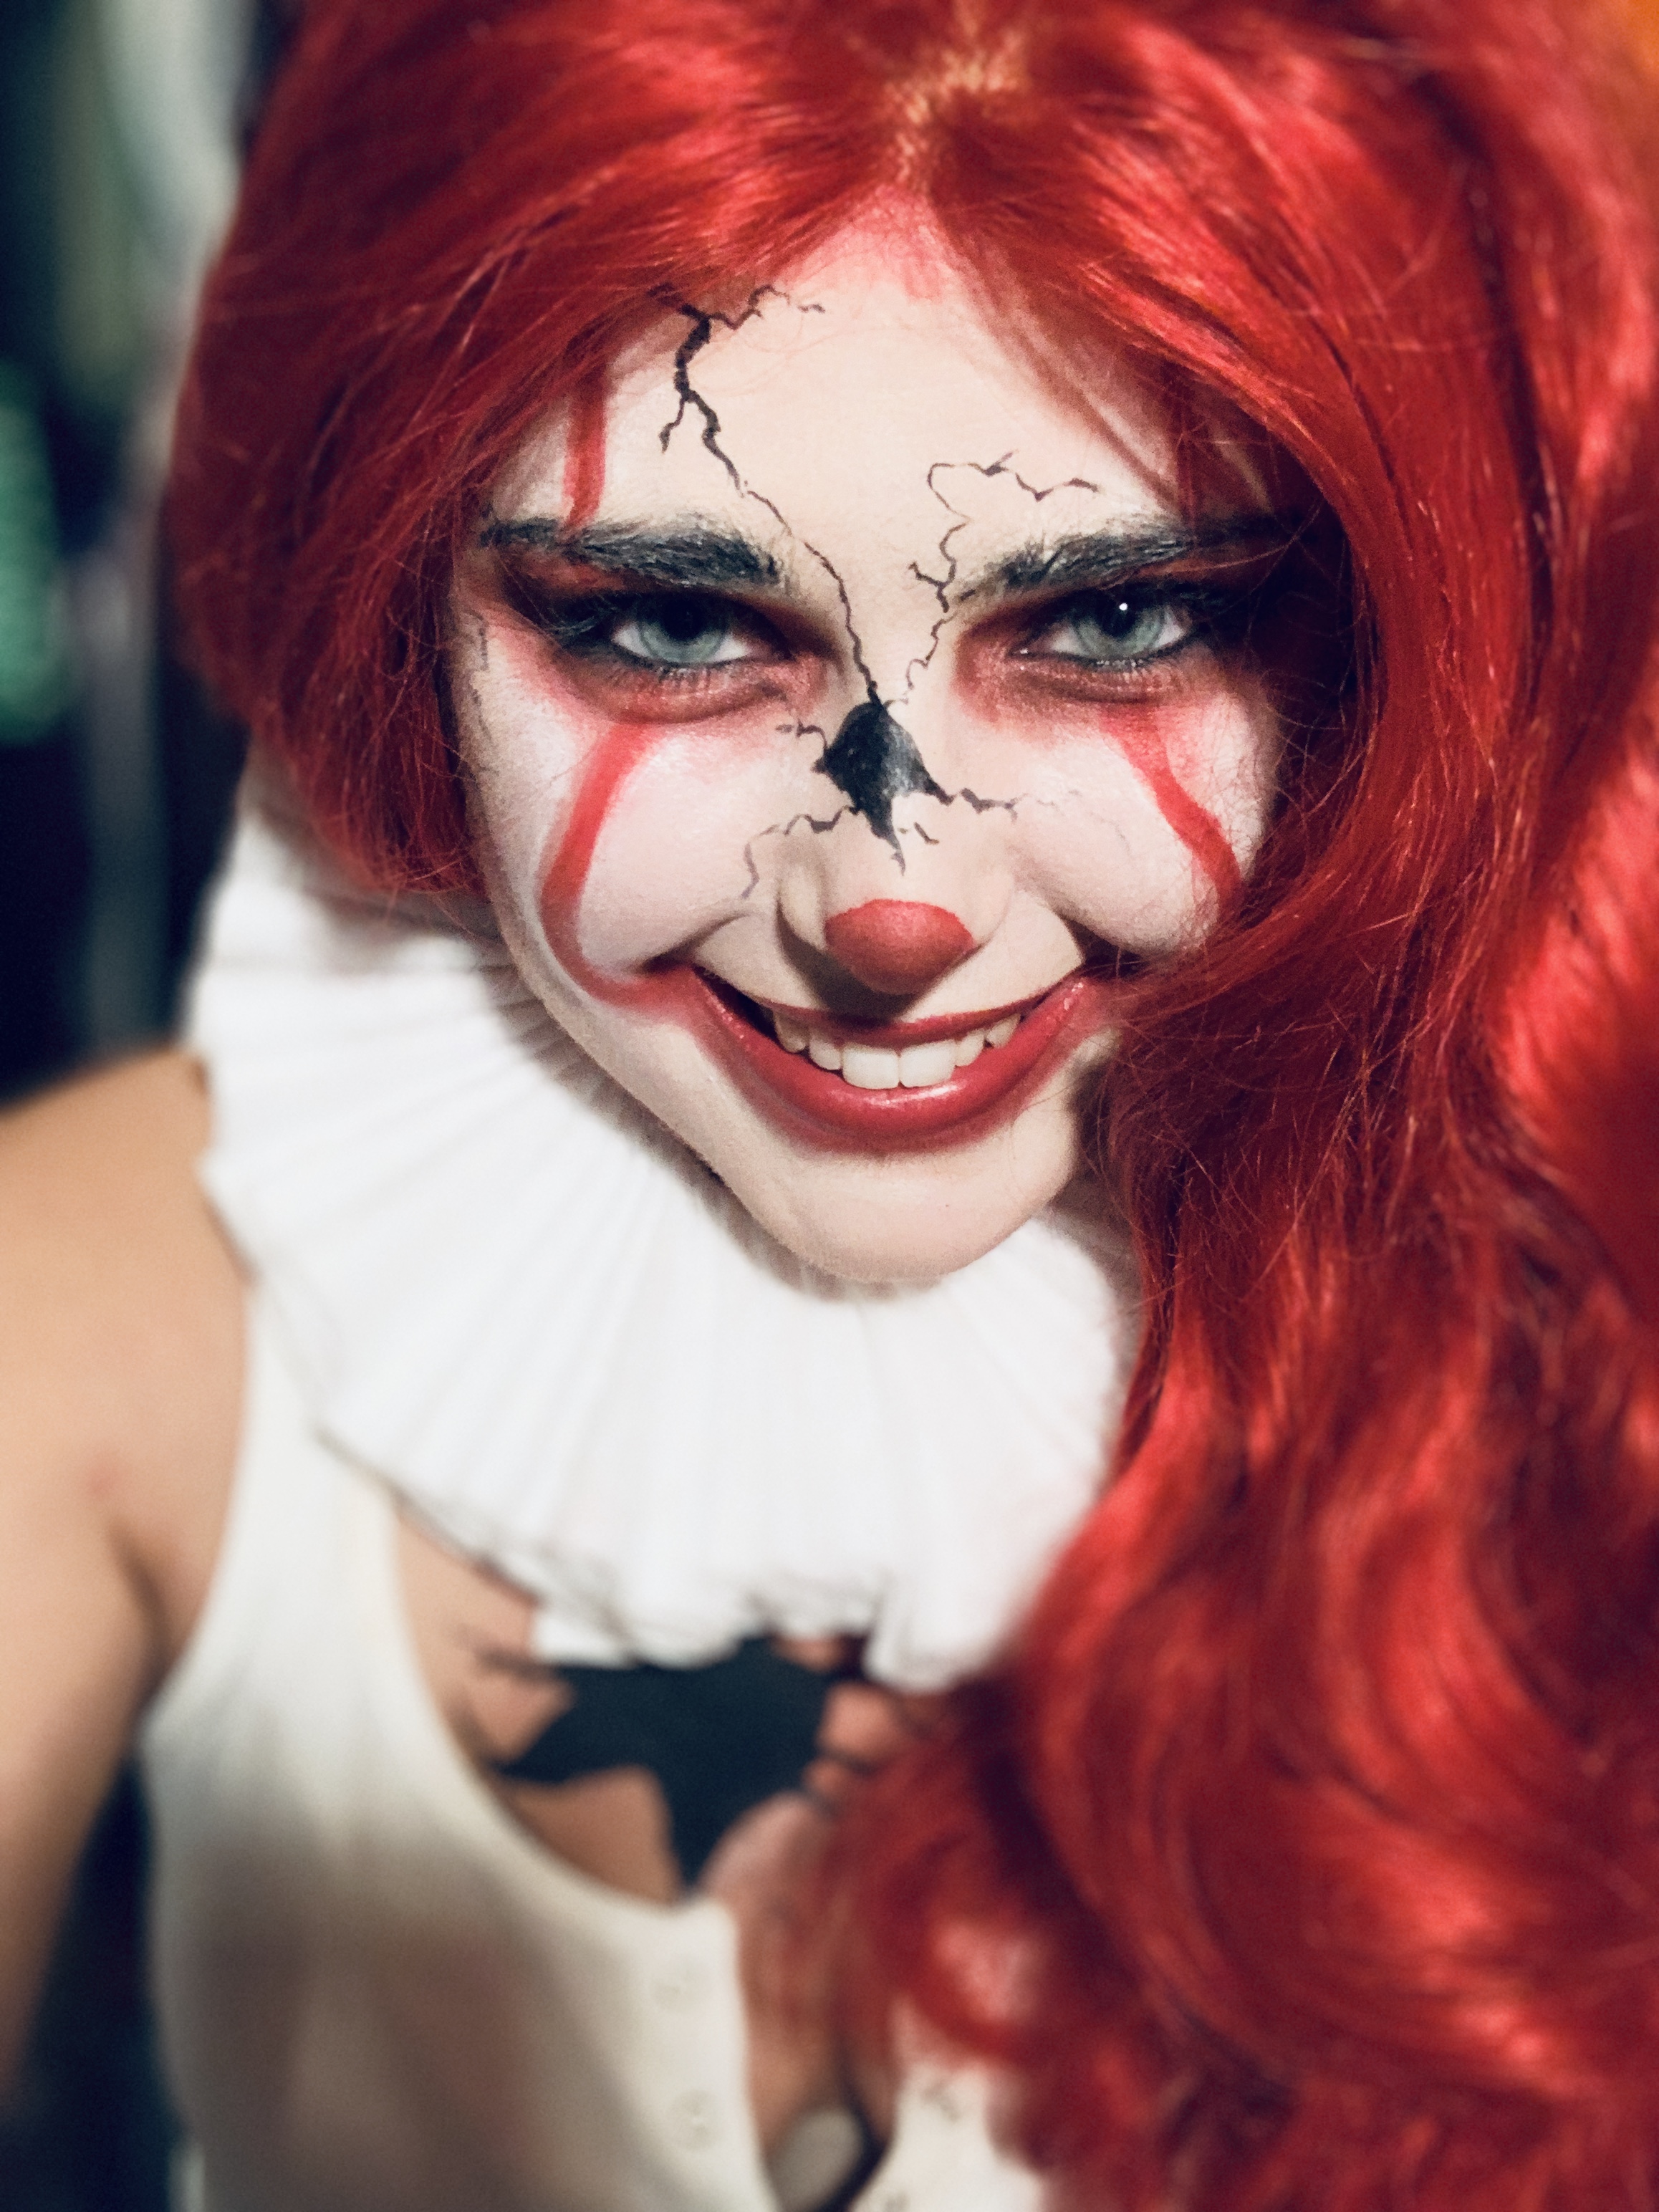 pennywise the clown, halloween horror-themed makeup look